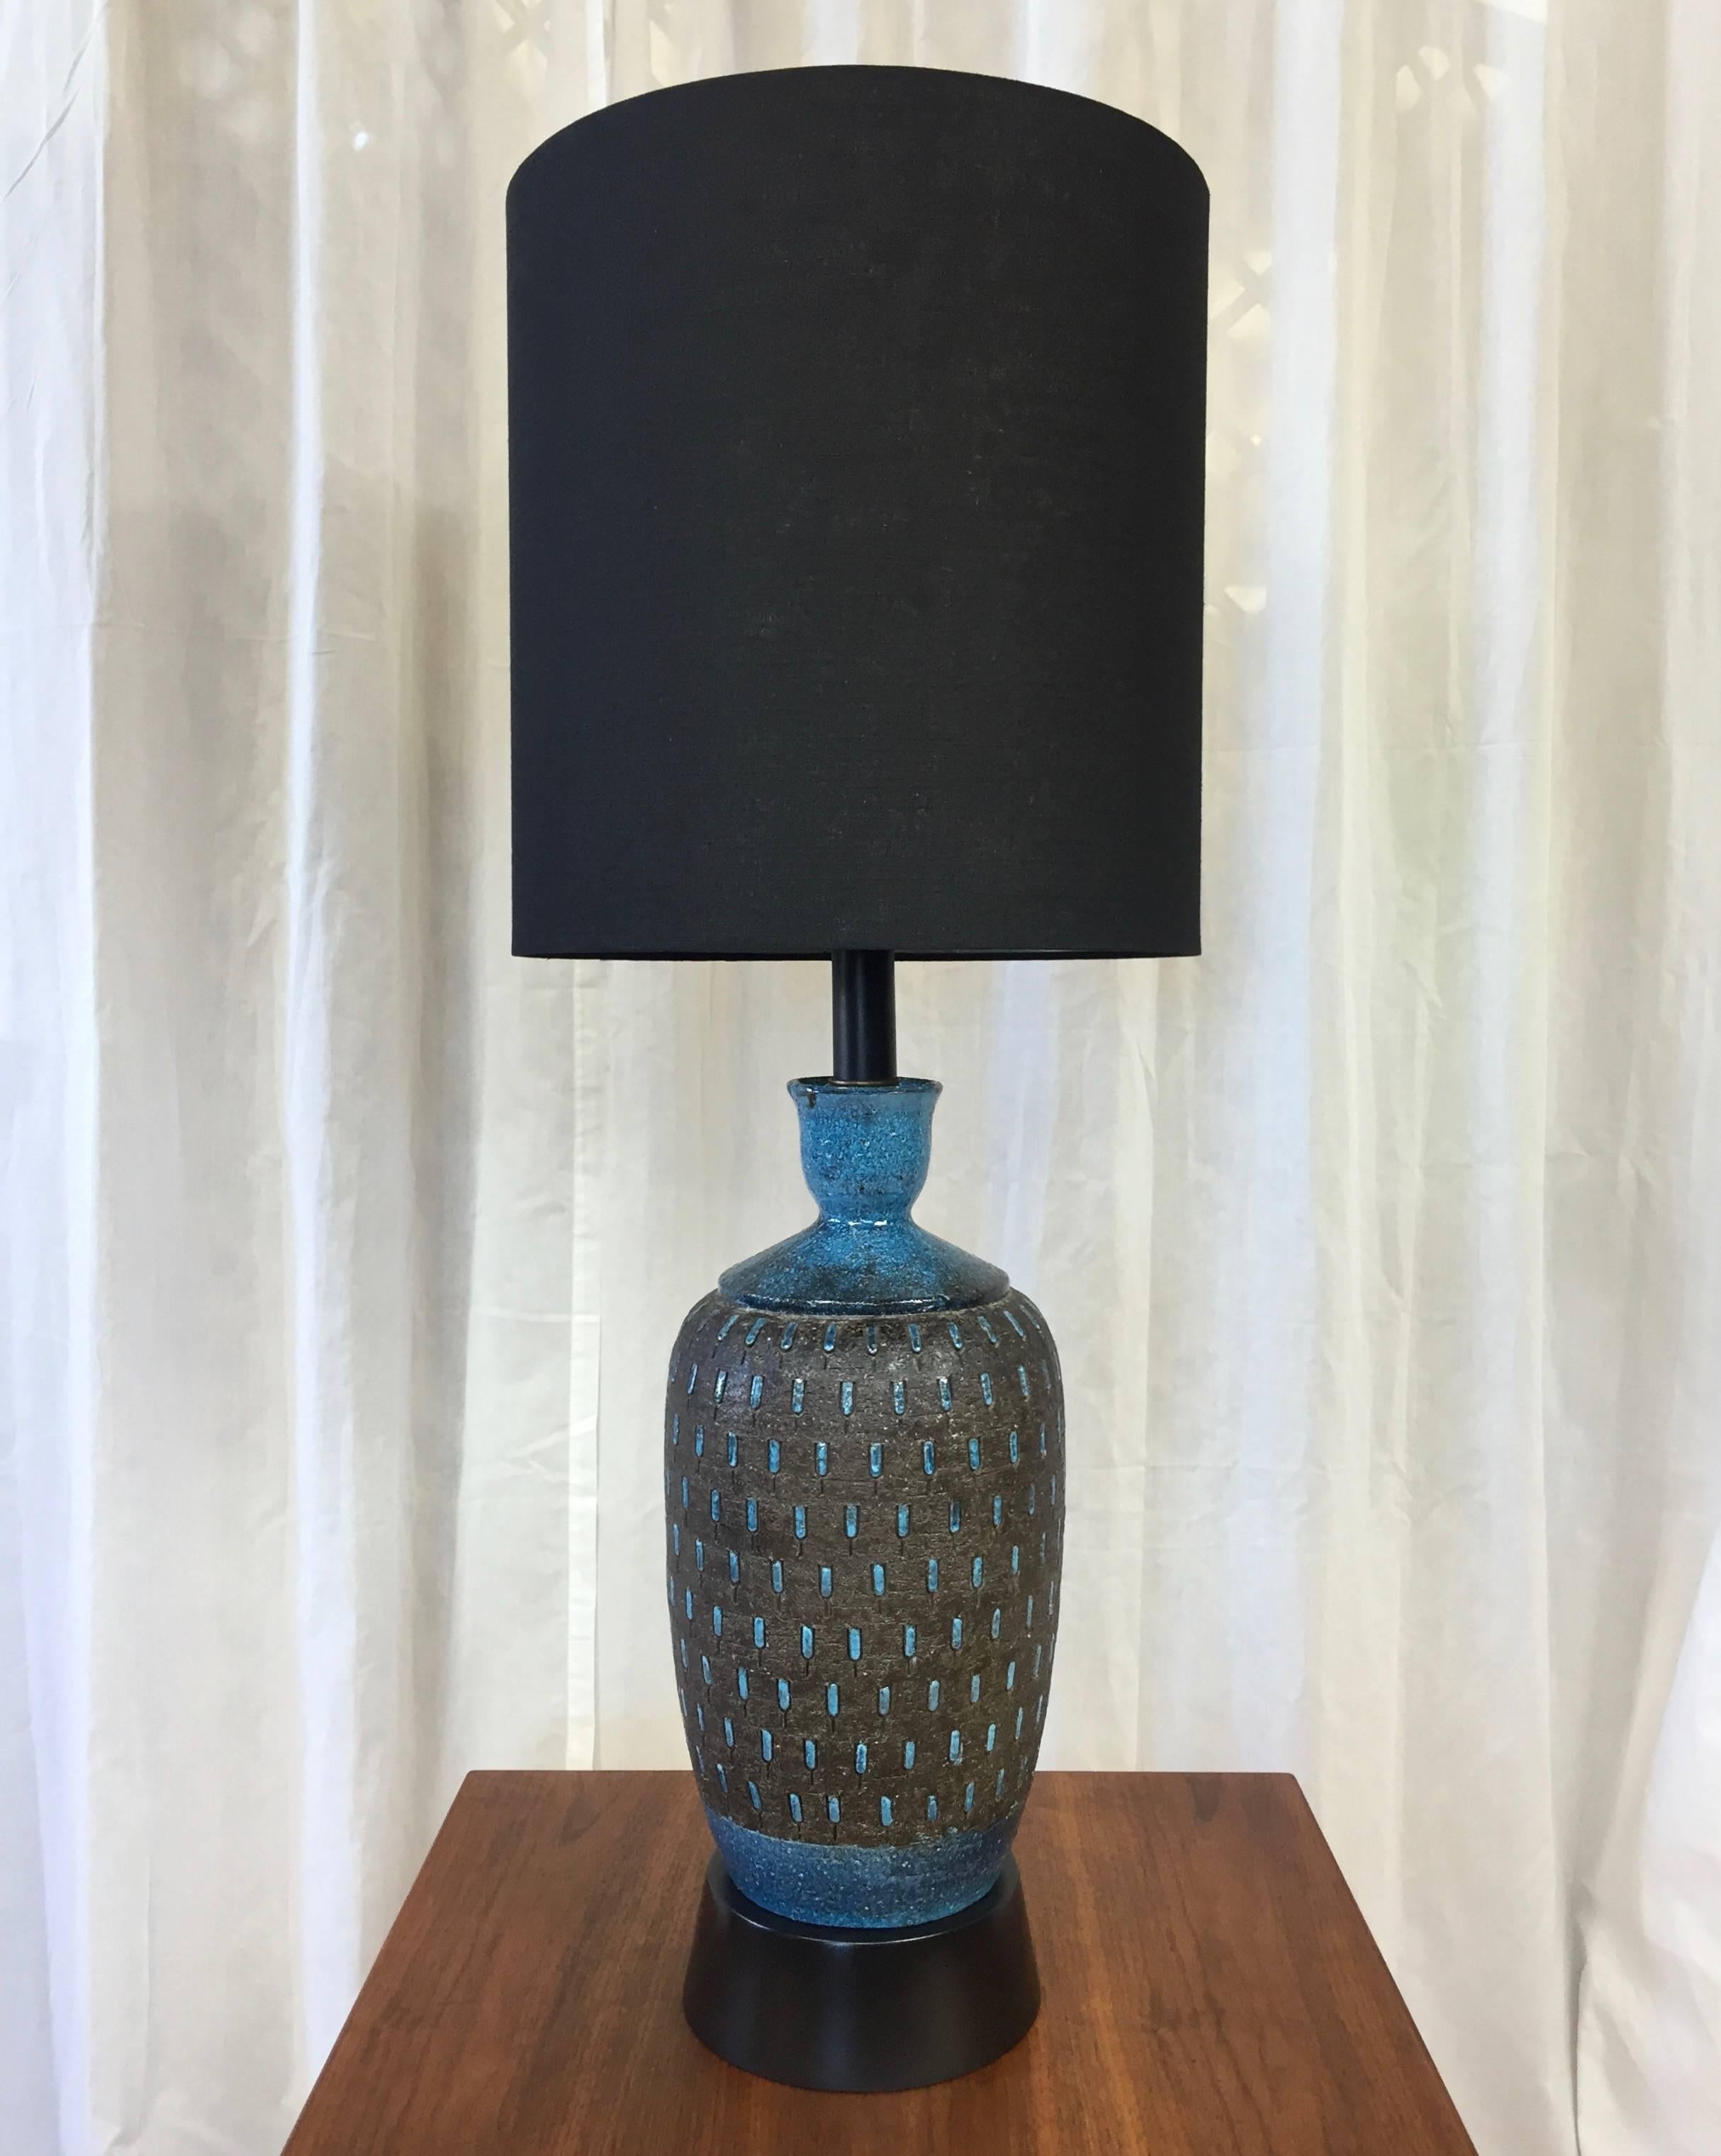 A very large and tall table lamp with “Rimini Blue” glaze and rare incised motif by Aldo Londi for Bitossi.

Urn-shaped body is of subtly textured brown pottery with a satin black finish, over which is applied glossy cerulean glaze. Hundreds of